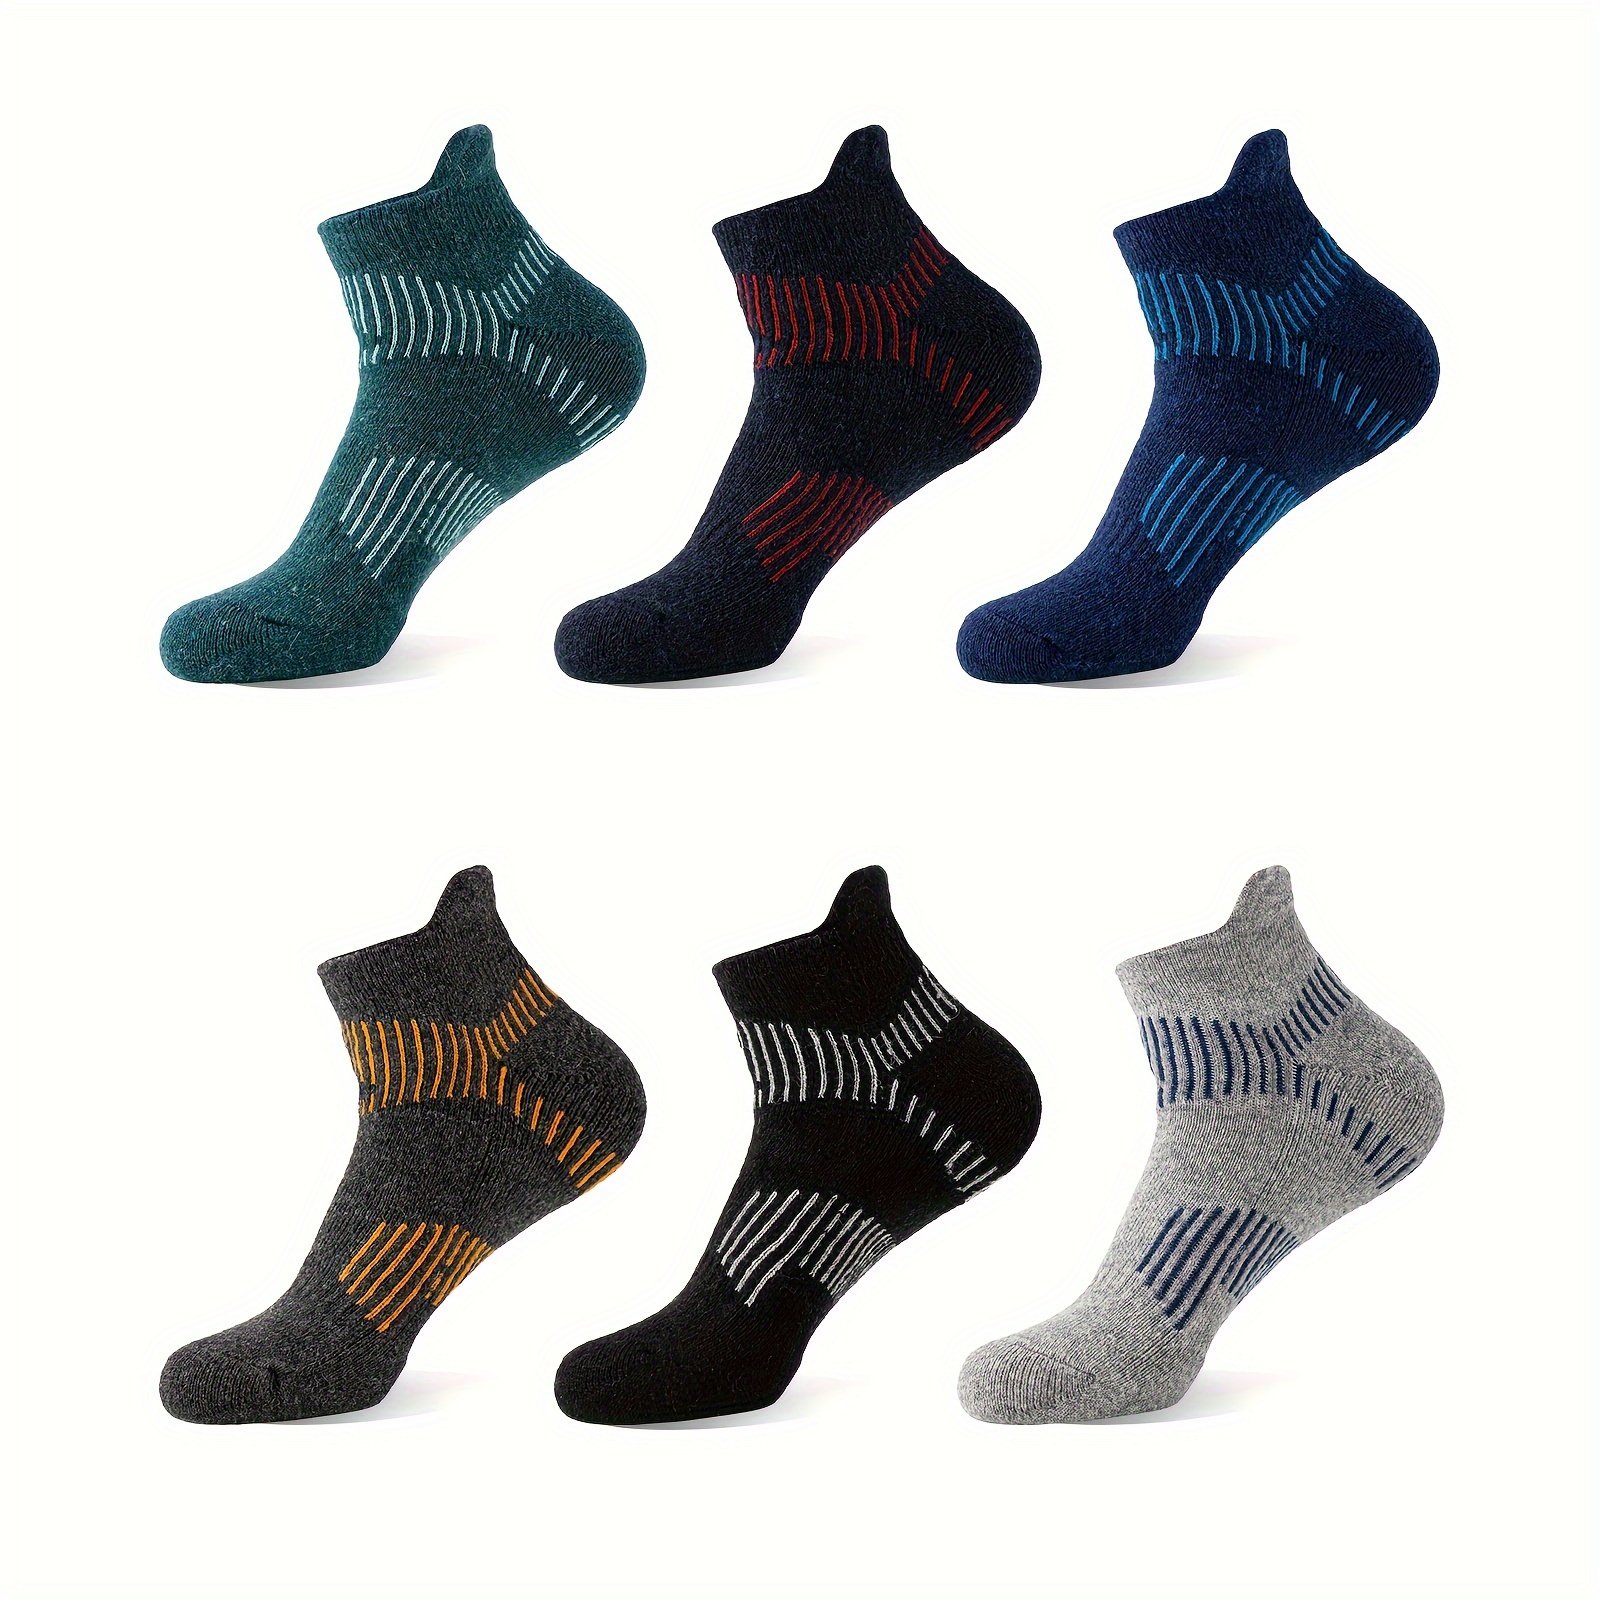 

6 Pairs Of Unisex Cotton Blend Anti Odor & Sweat Absorption Low Cut Socks, Comfy & Breathable Sport Socks, For Daily And Outdoor Wearing